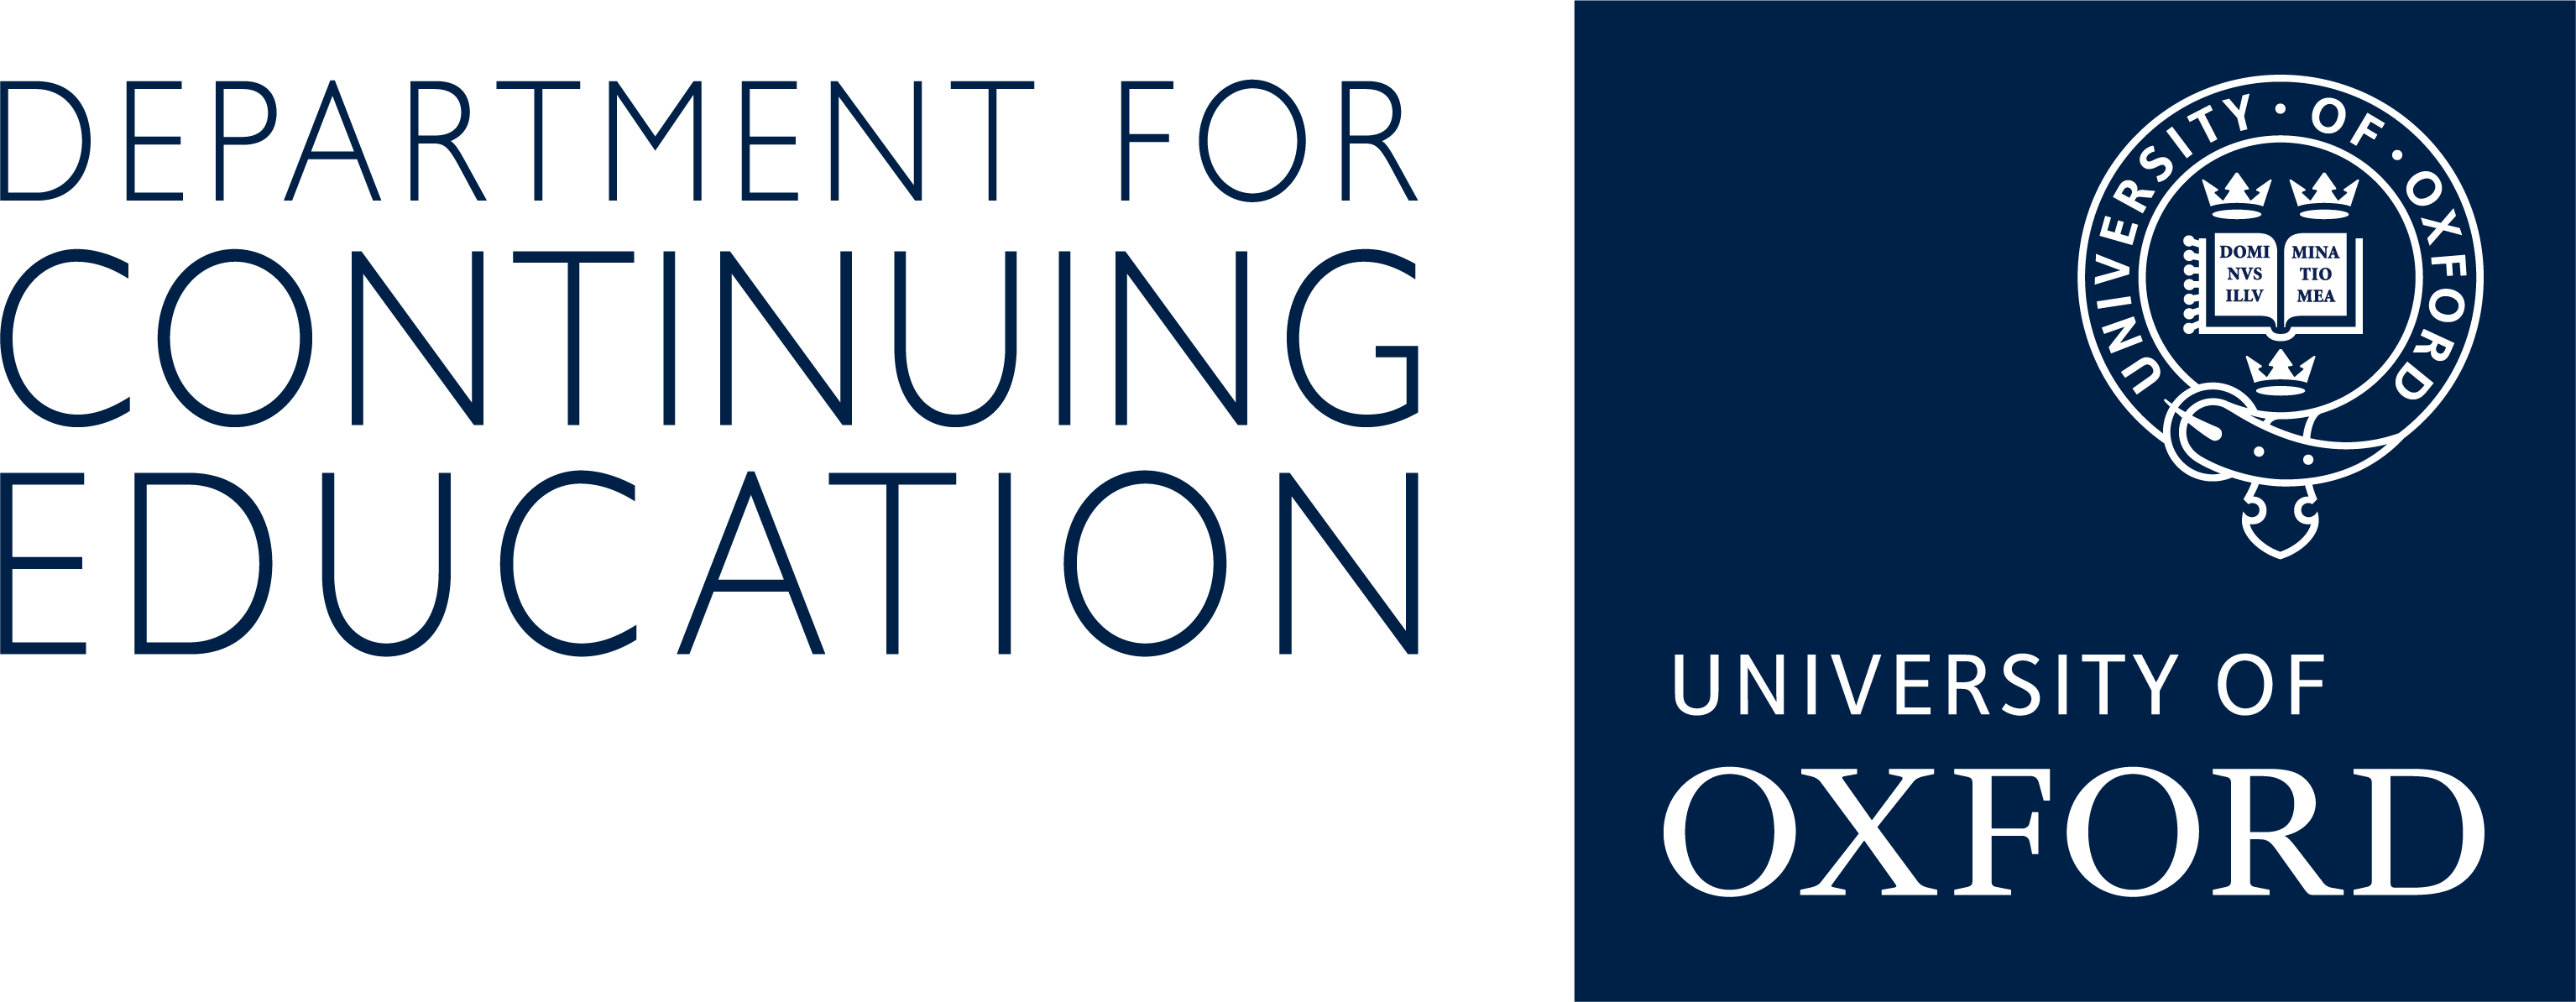 Gain an Oxford qualification | Oxford University Department for Continuing Education Logo